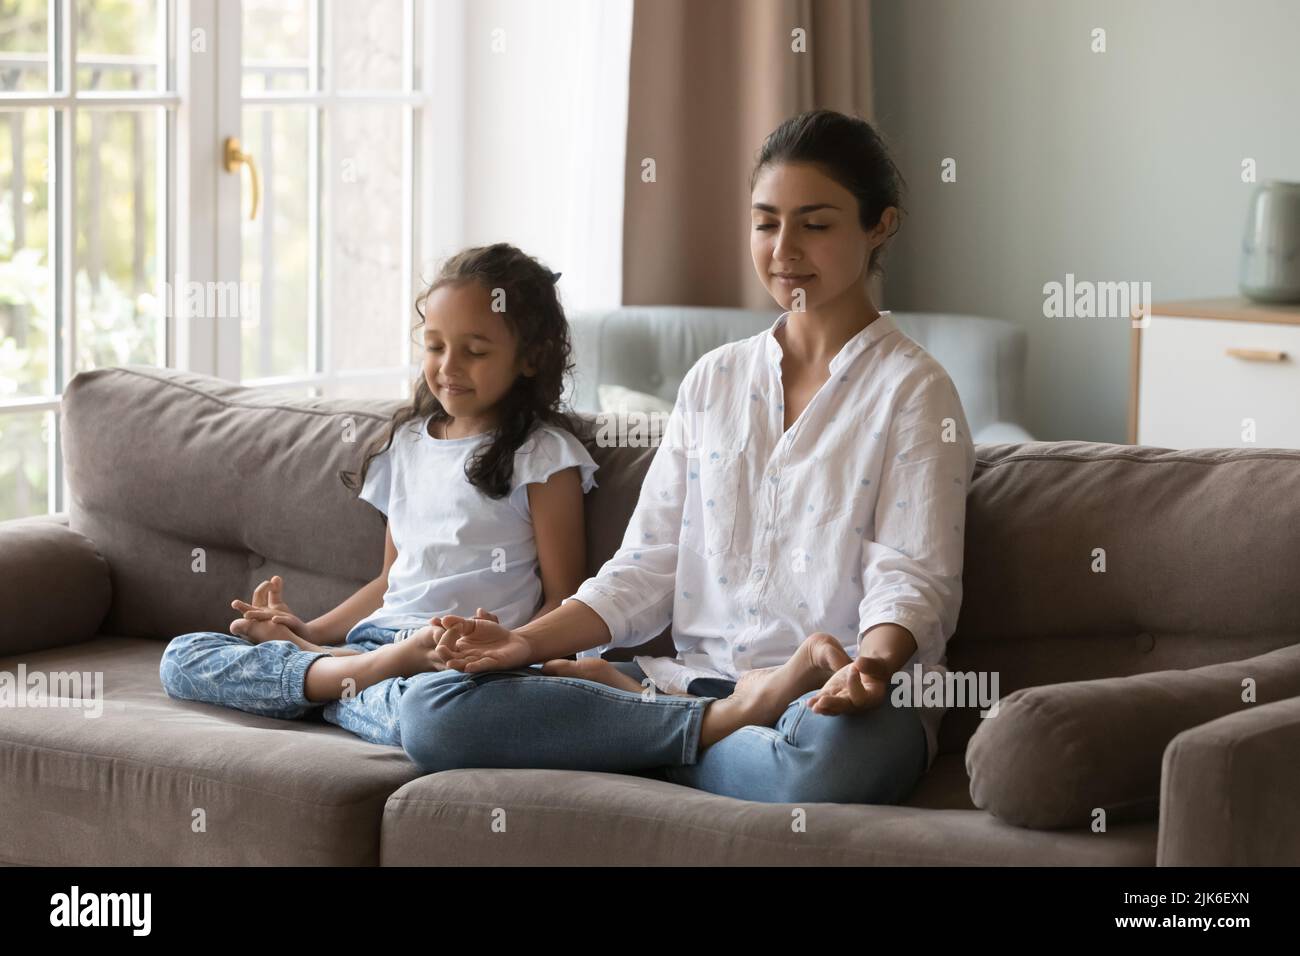 Peaceful young Indian mother teaching girl to meditate at home Stock Photo